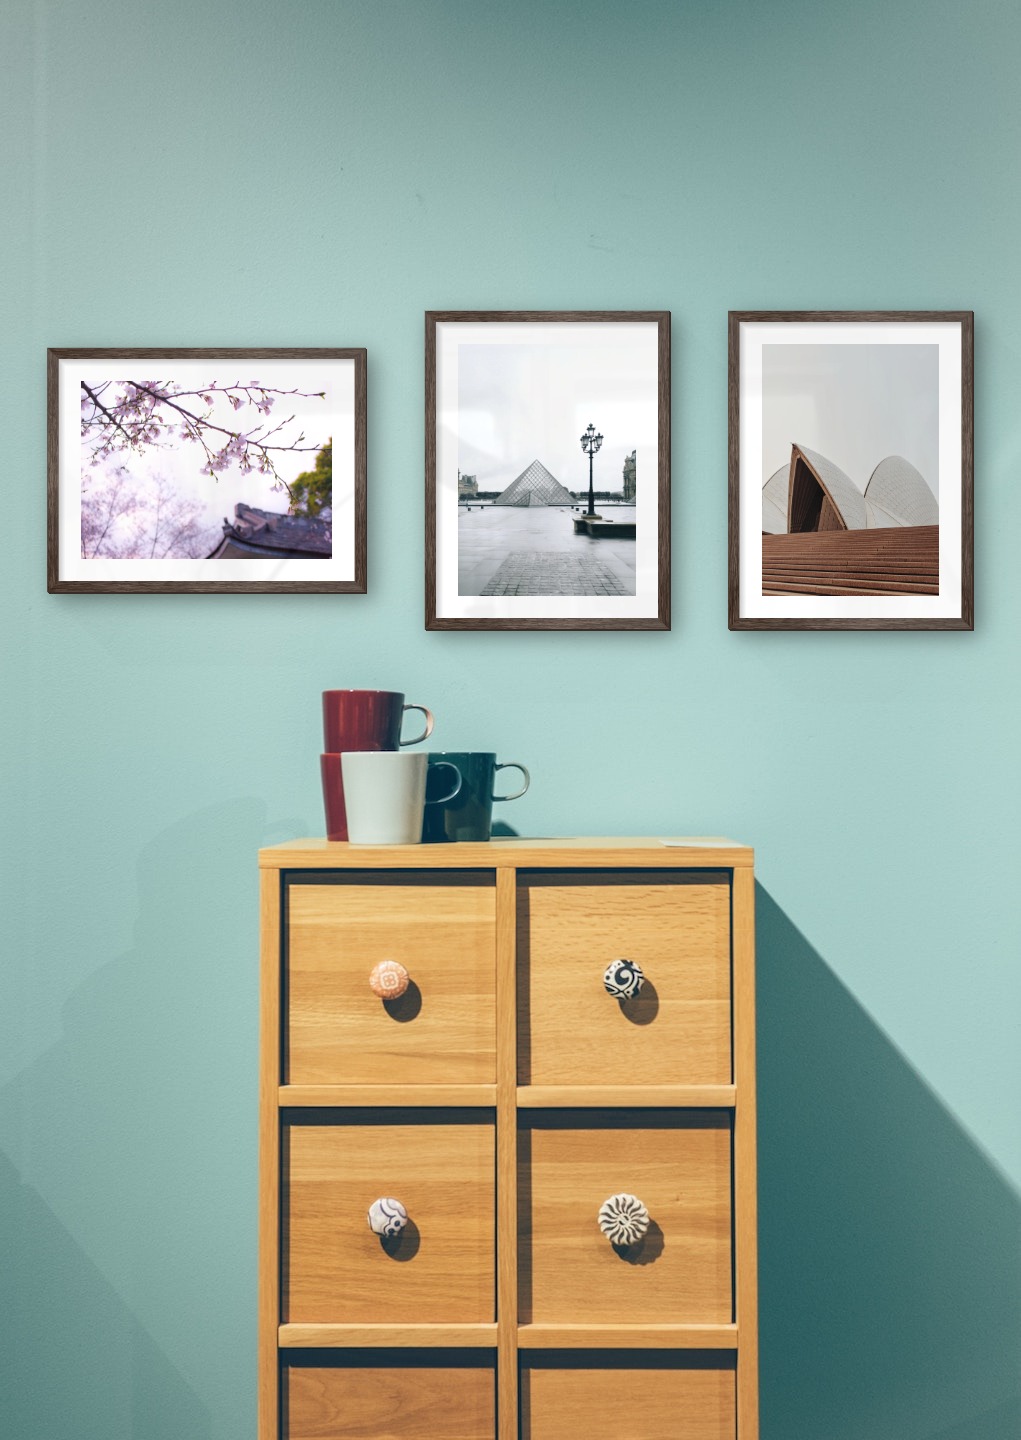 Gallery wall with picture frames in dark wood in sizes 30x40 with prints "Flowers in Tokyo", "Louvre in Paris" and "Sydney Opera House"